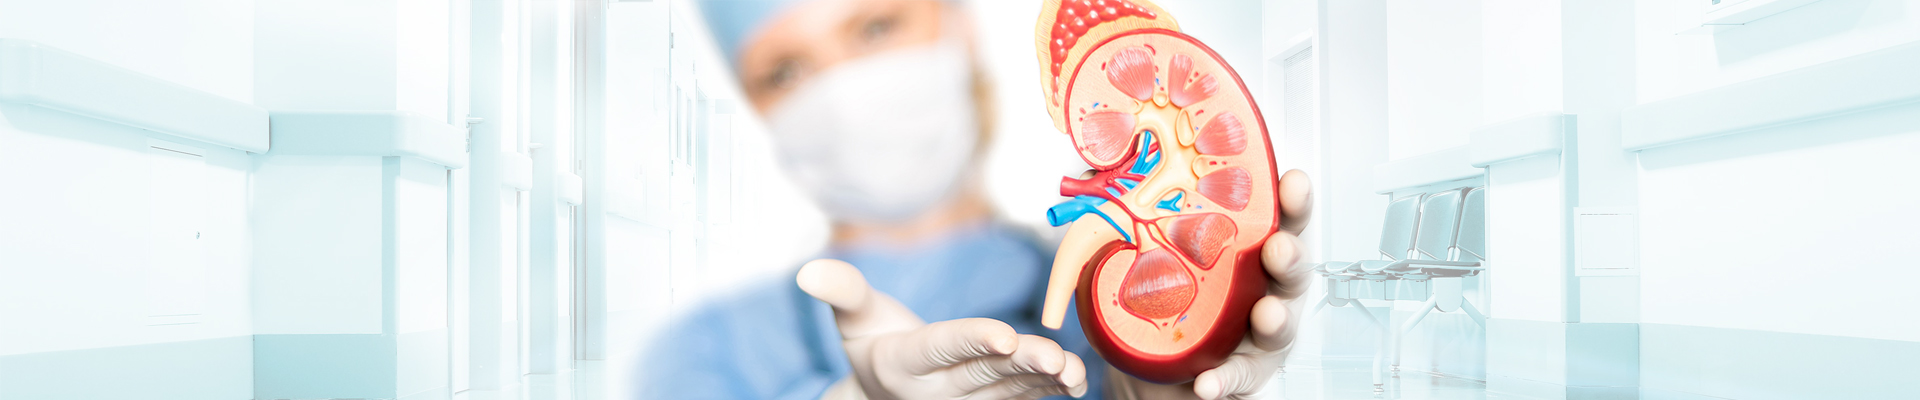 Kidney stone doctor in Chennai | ECIRS specialist in Chennai | Chennai Kidney Care